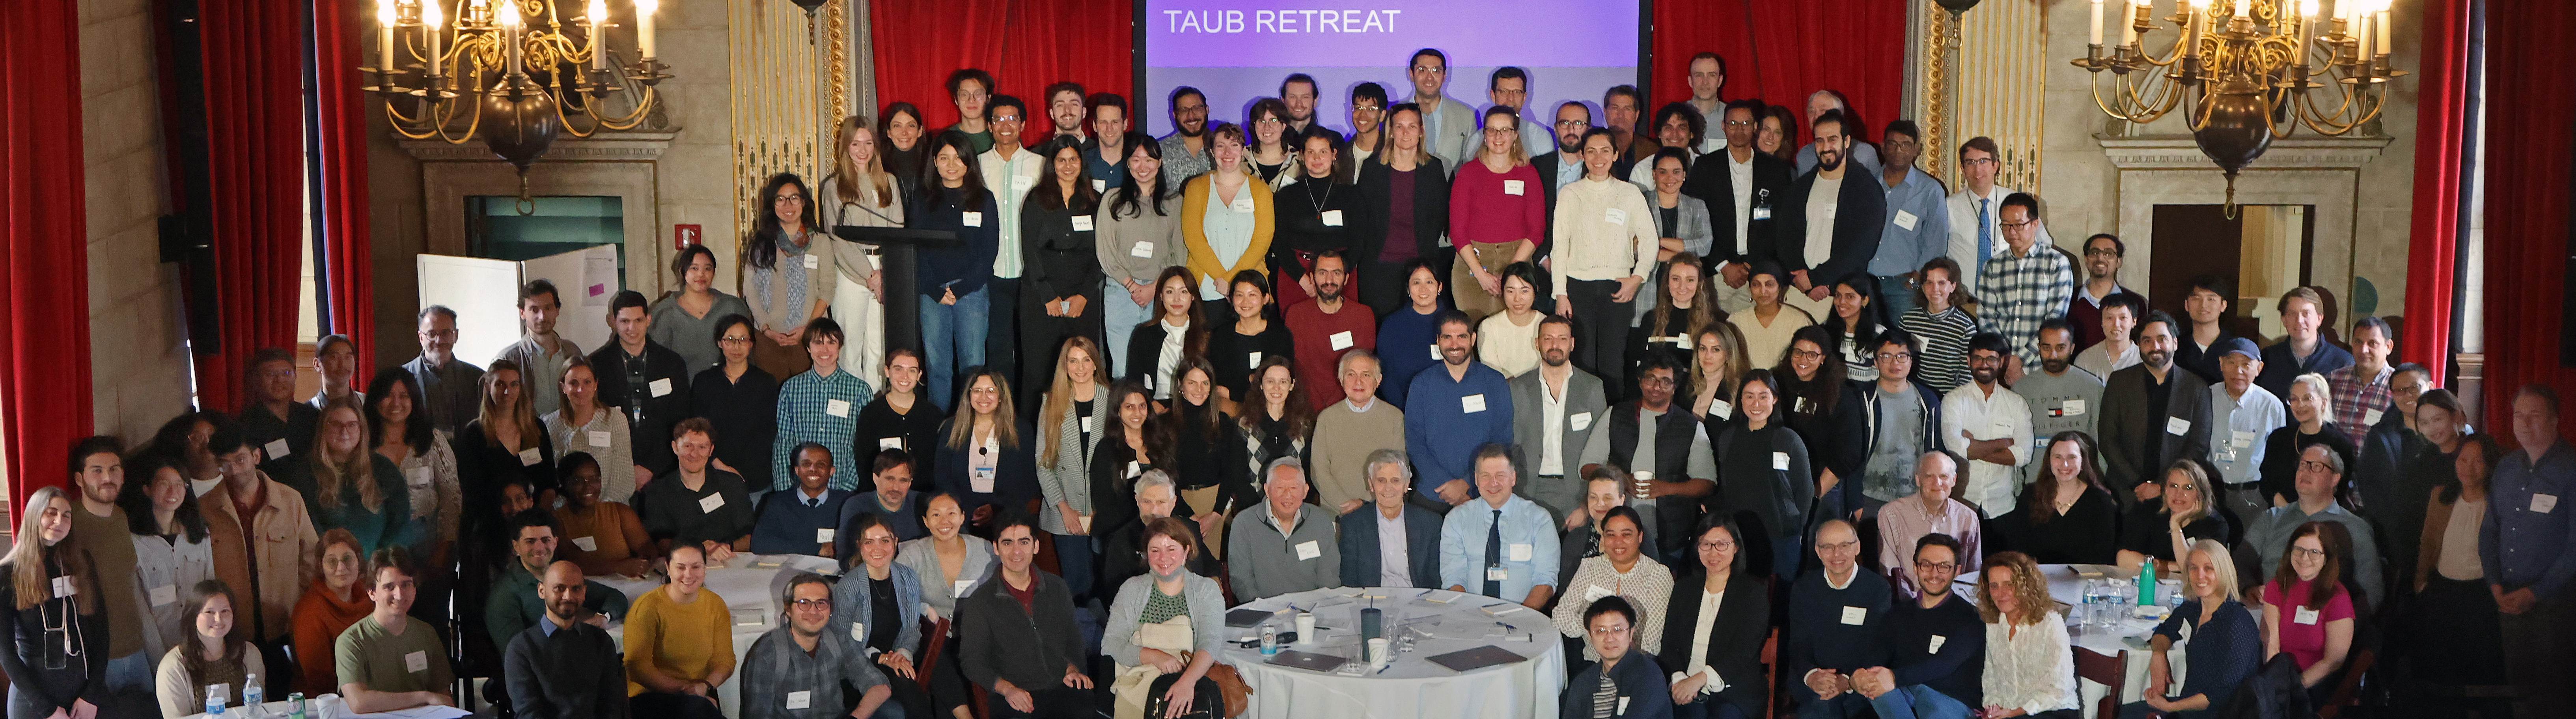 13th Annual Taub Institute Research Retreat Group Photo